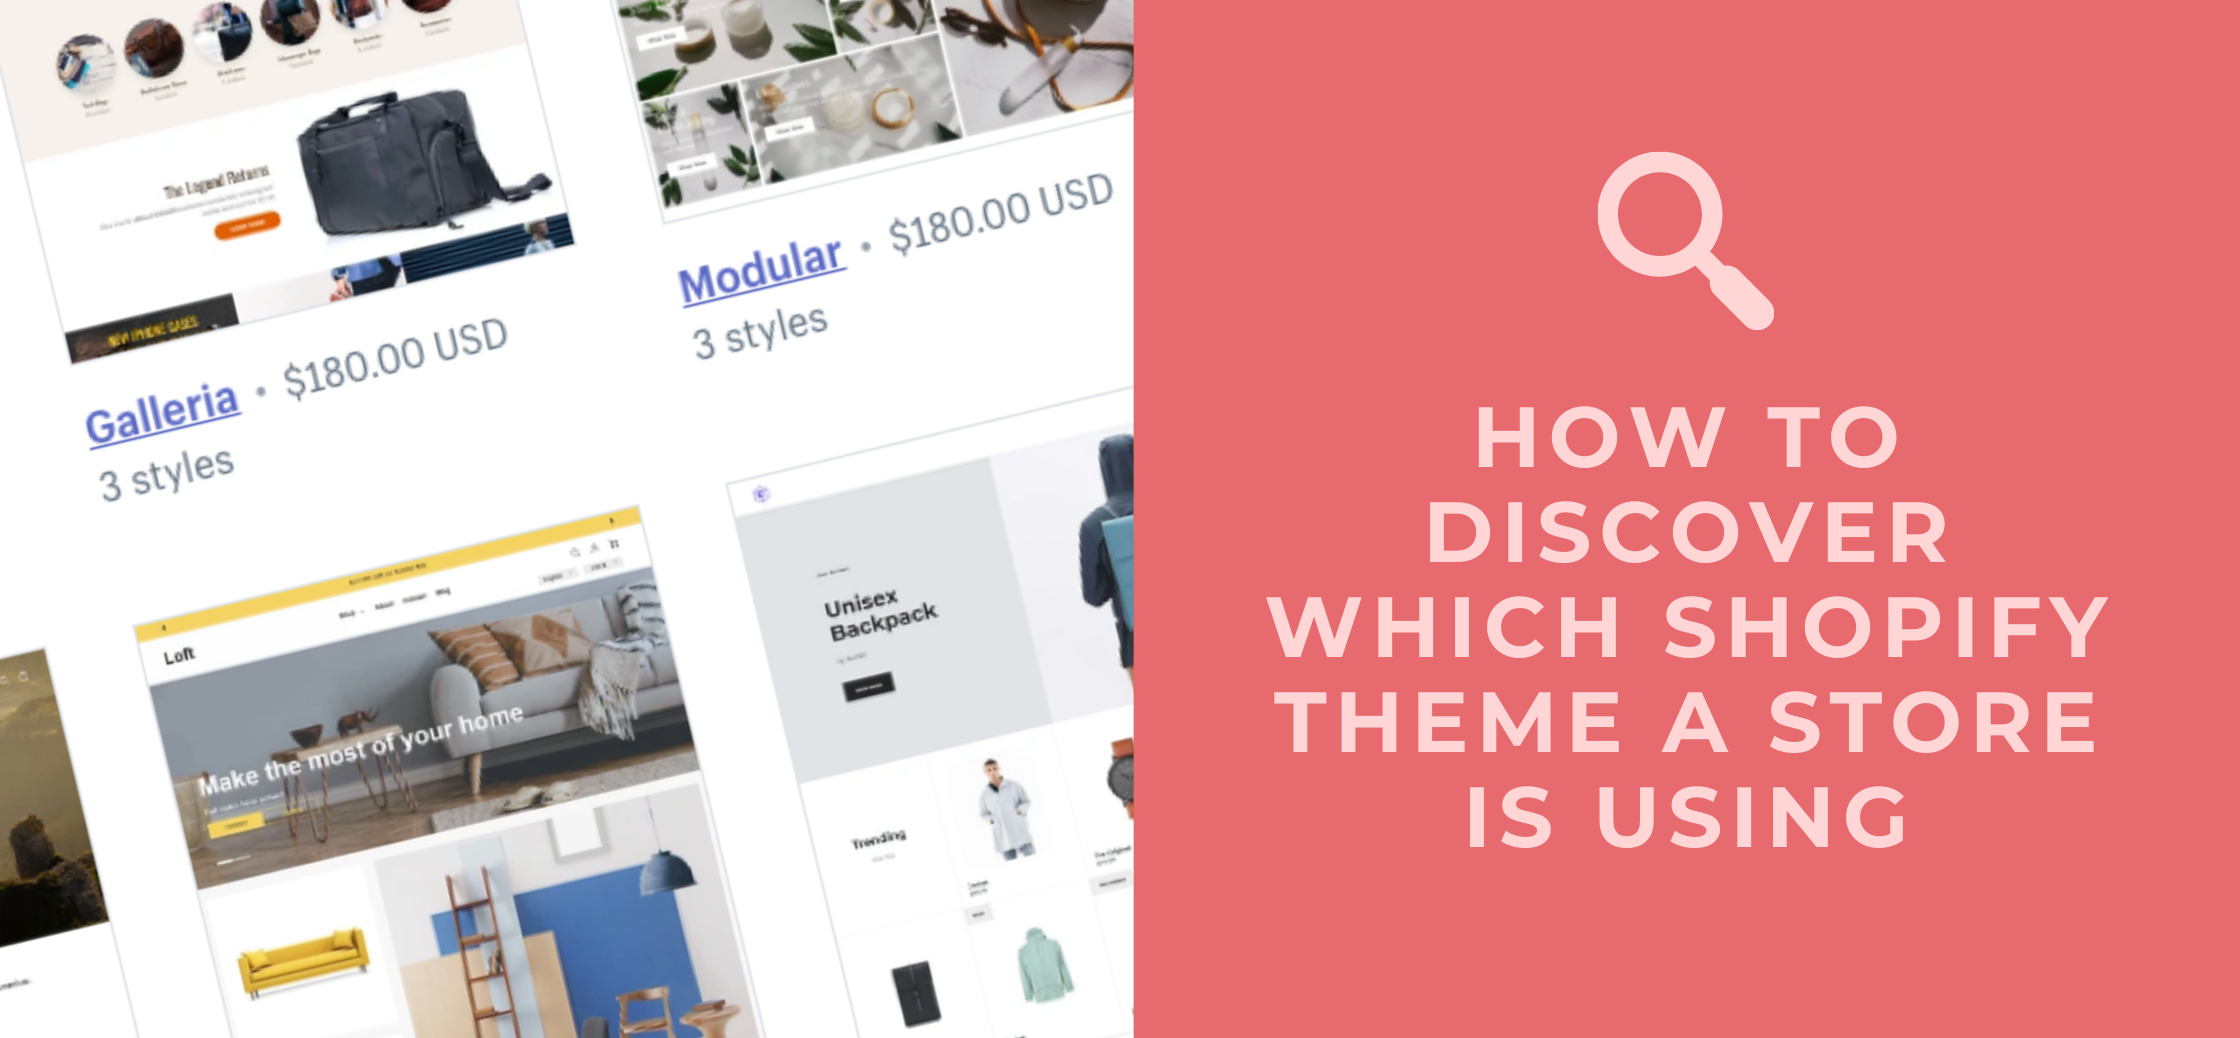 How to Discover Which Shopify Theme a Store is Using